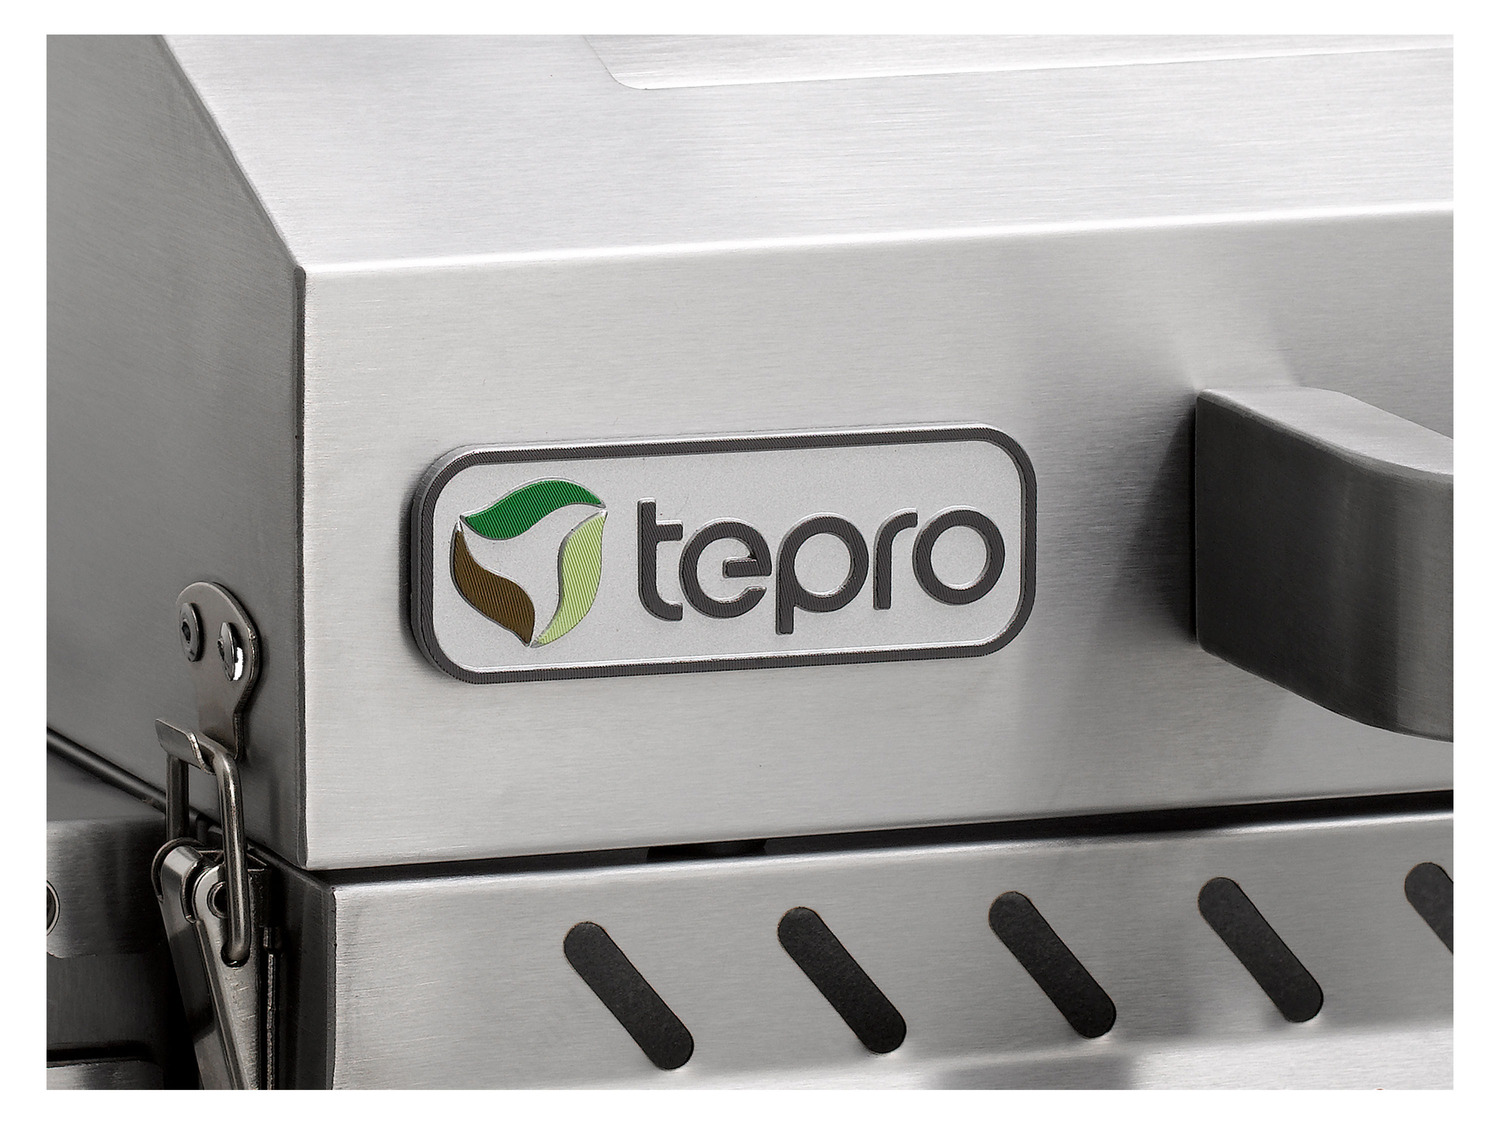 Gasgrill Edition, Brenner, 3 Special 9… tepro »Chicago«